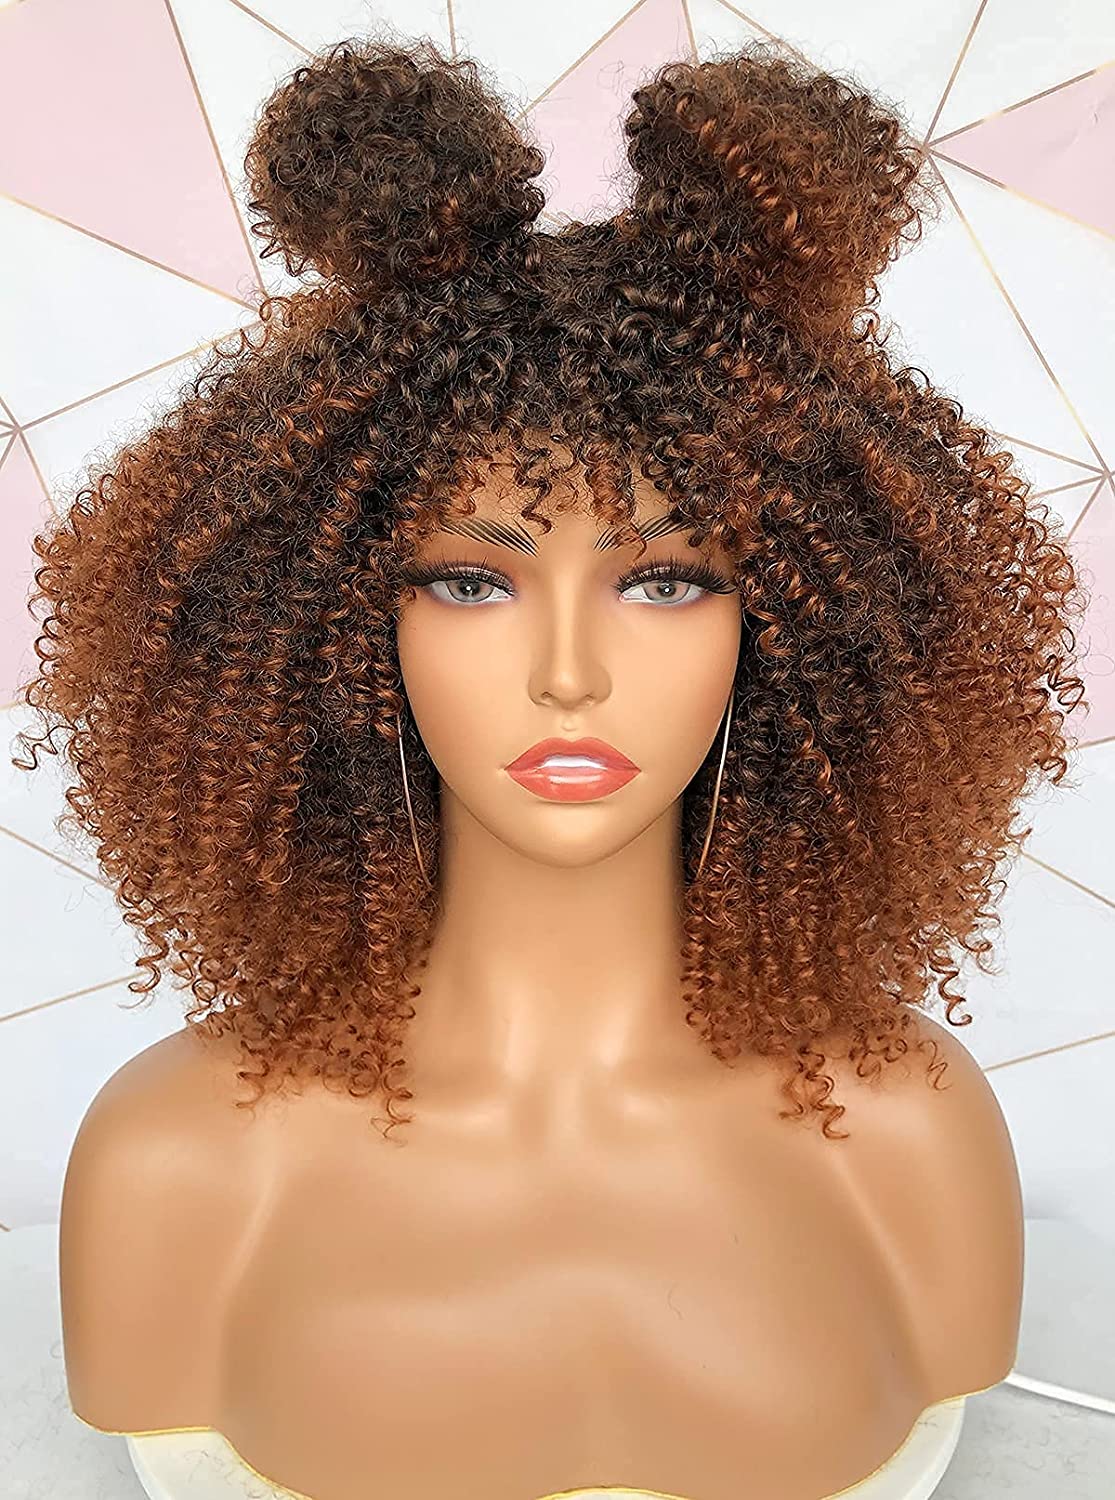 Curlcoo Short Curly Afro Wigs With Bangs For Black Women Kinky Curly Hair Wig Afro Synthetic